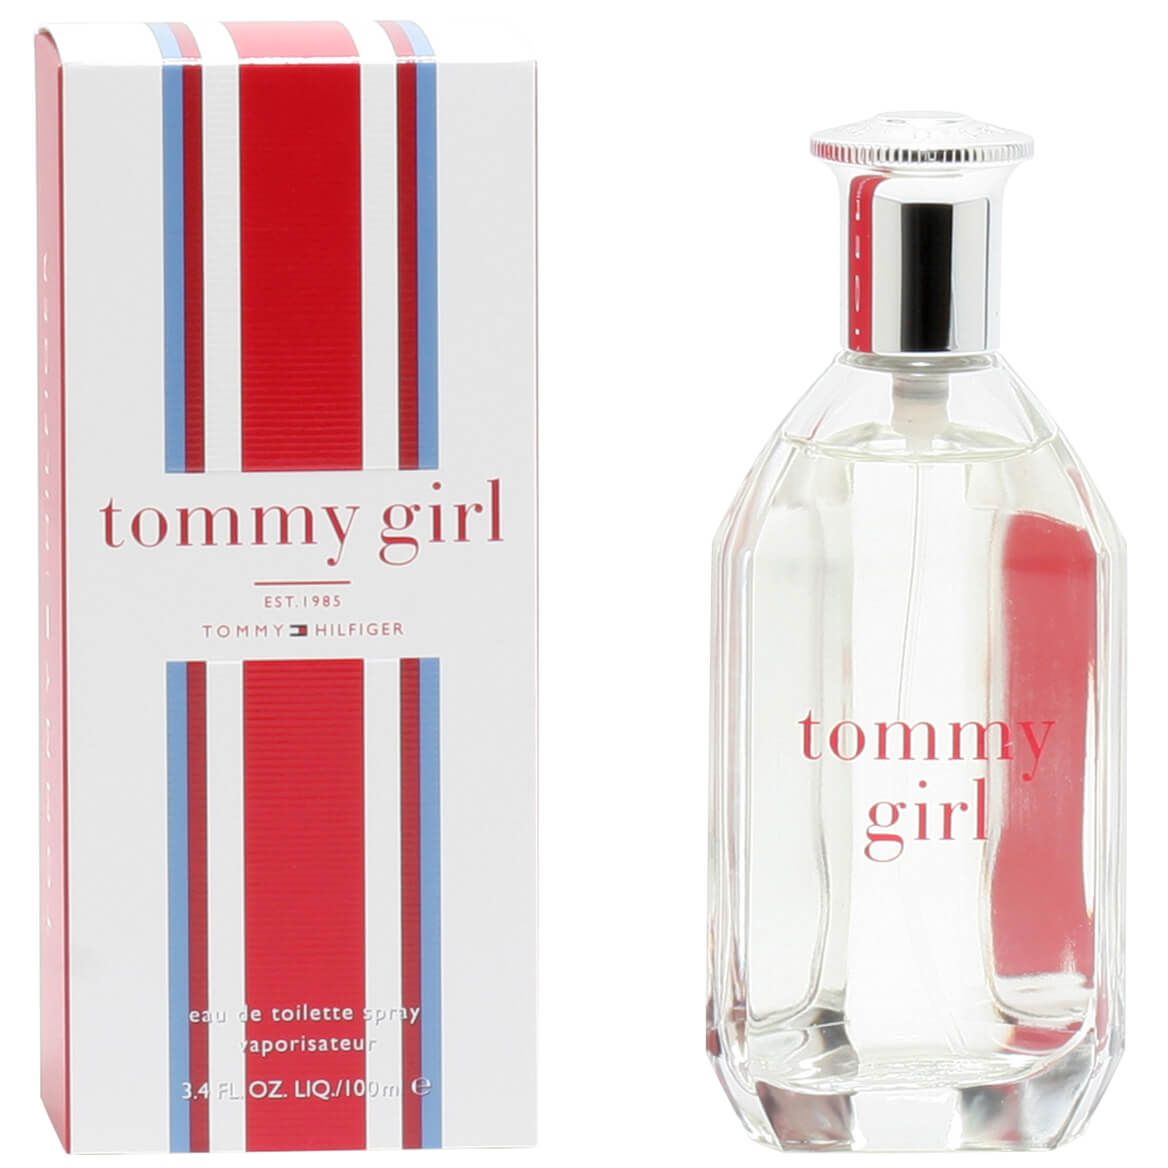 Tommy Girl by Tommy Hilfiger for Women EDT, 3.4 fl. oz. + '-' + 377151